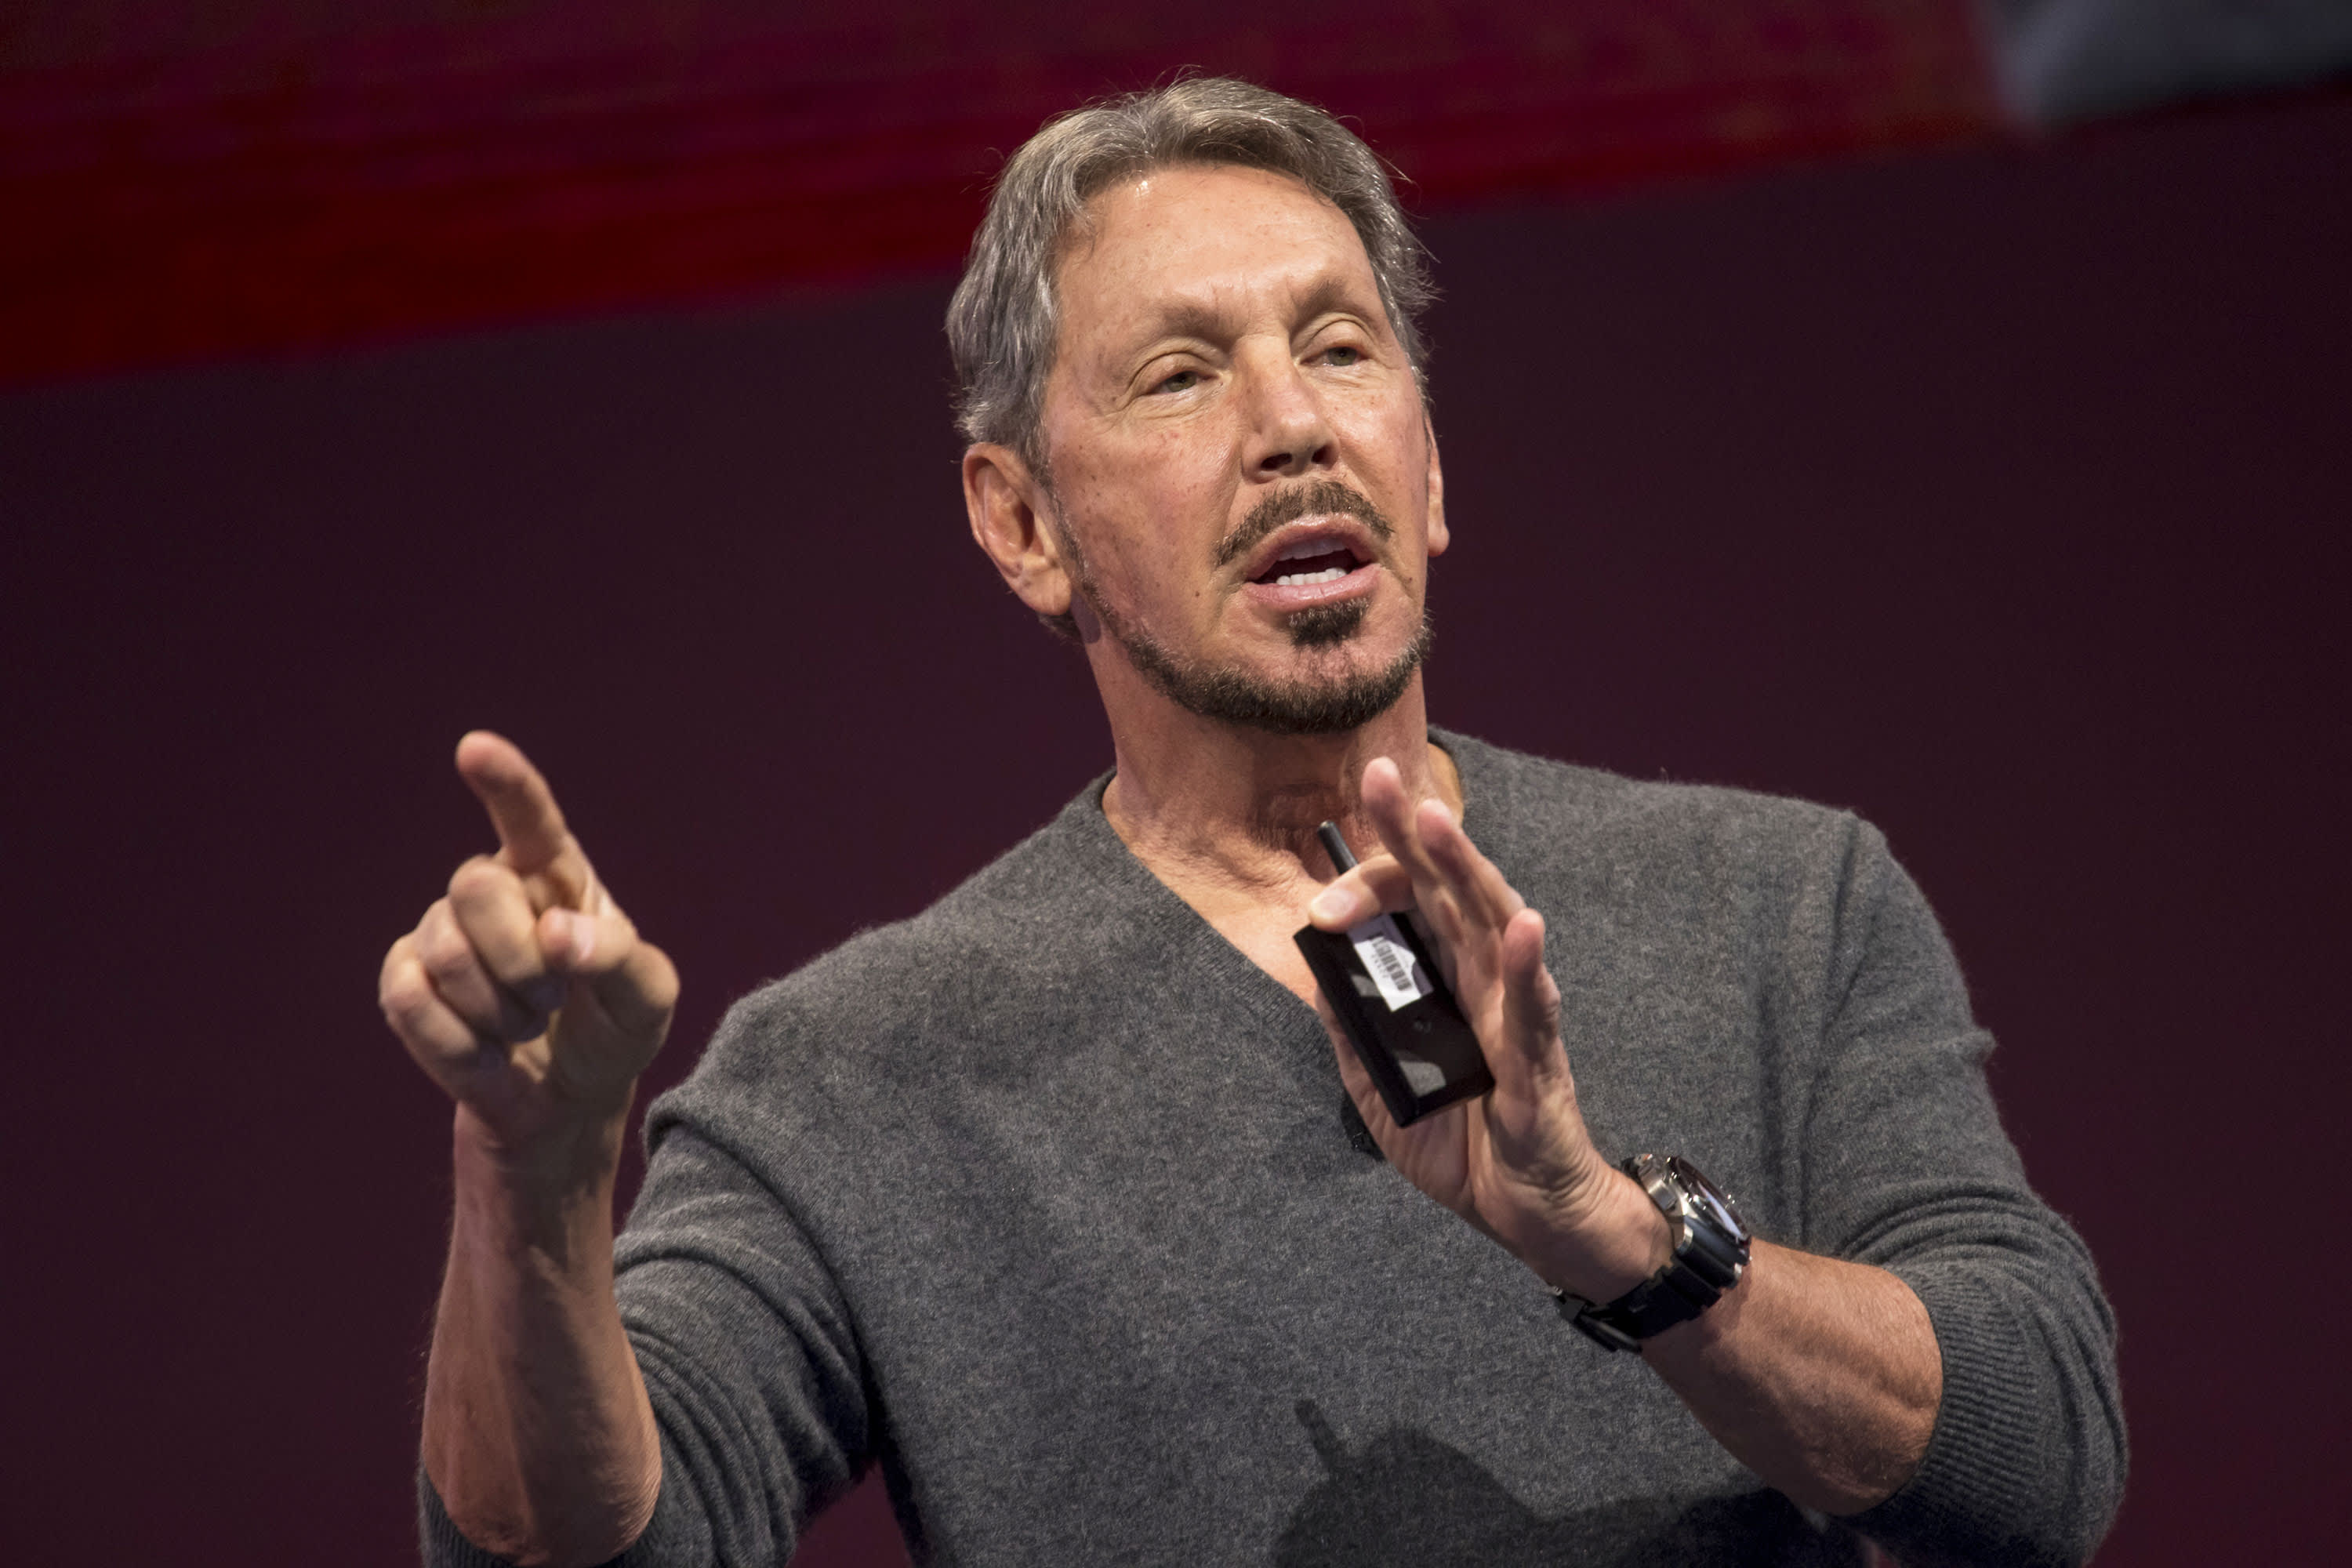 Google will stop using Oracle financial software, move to SAP